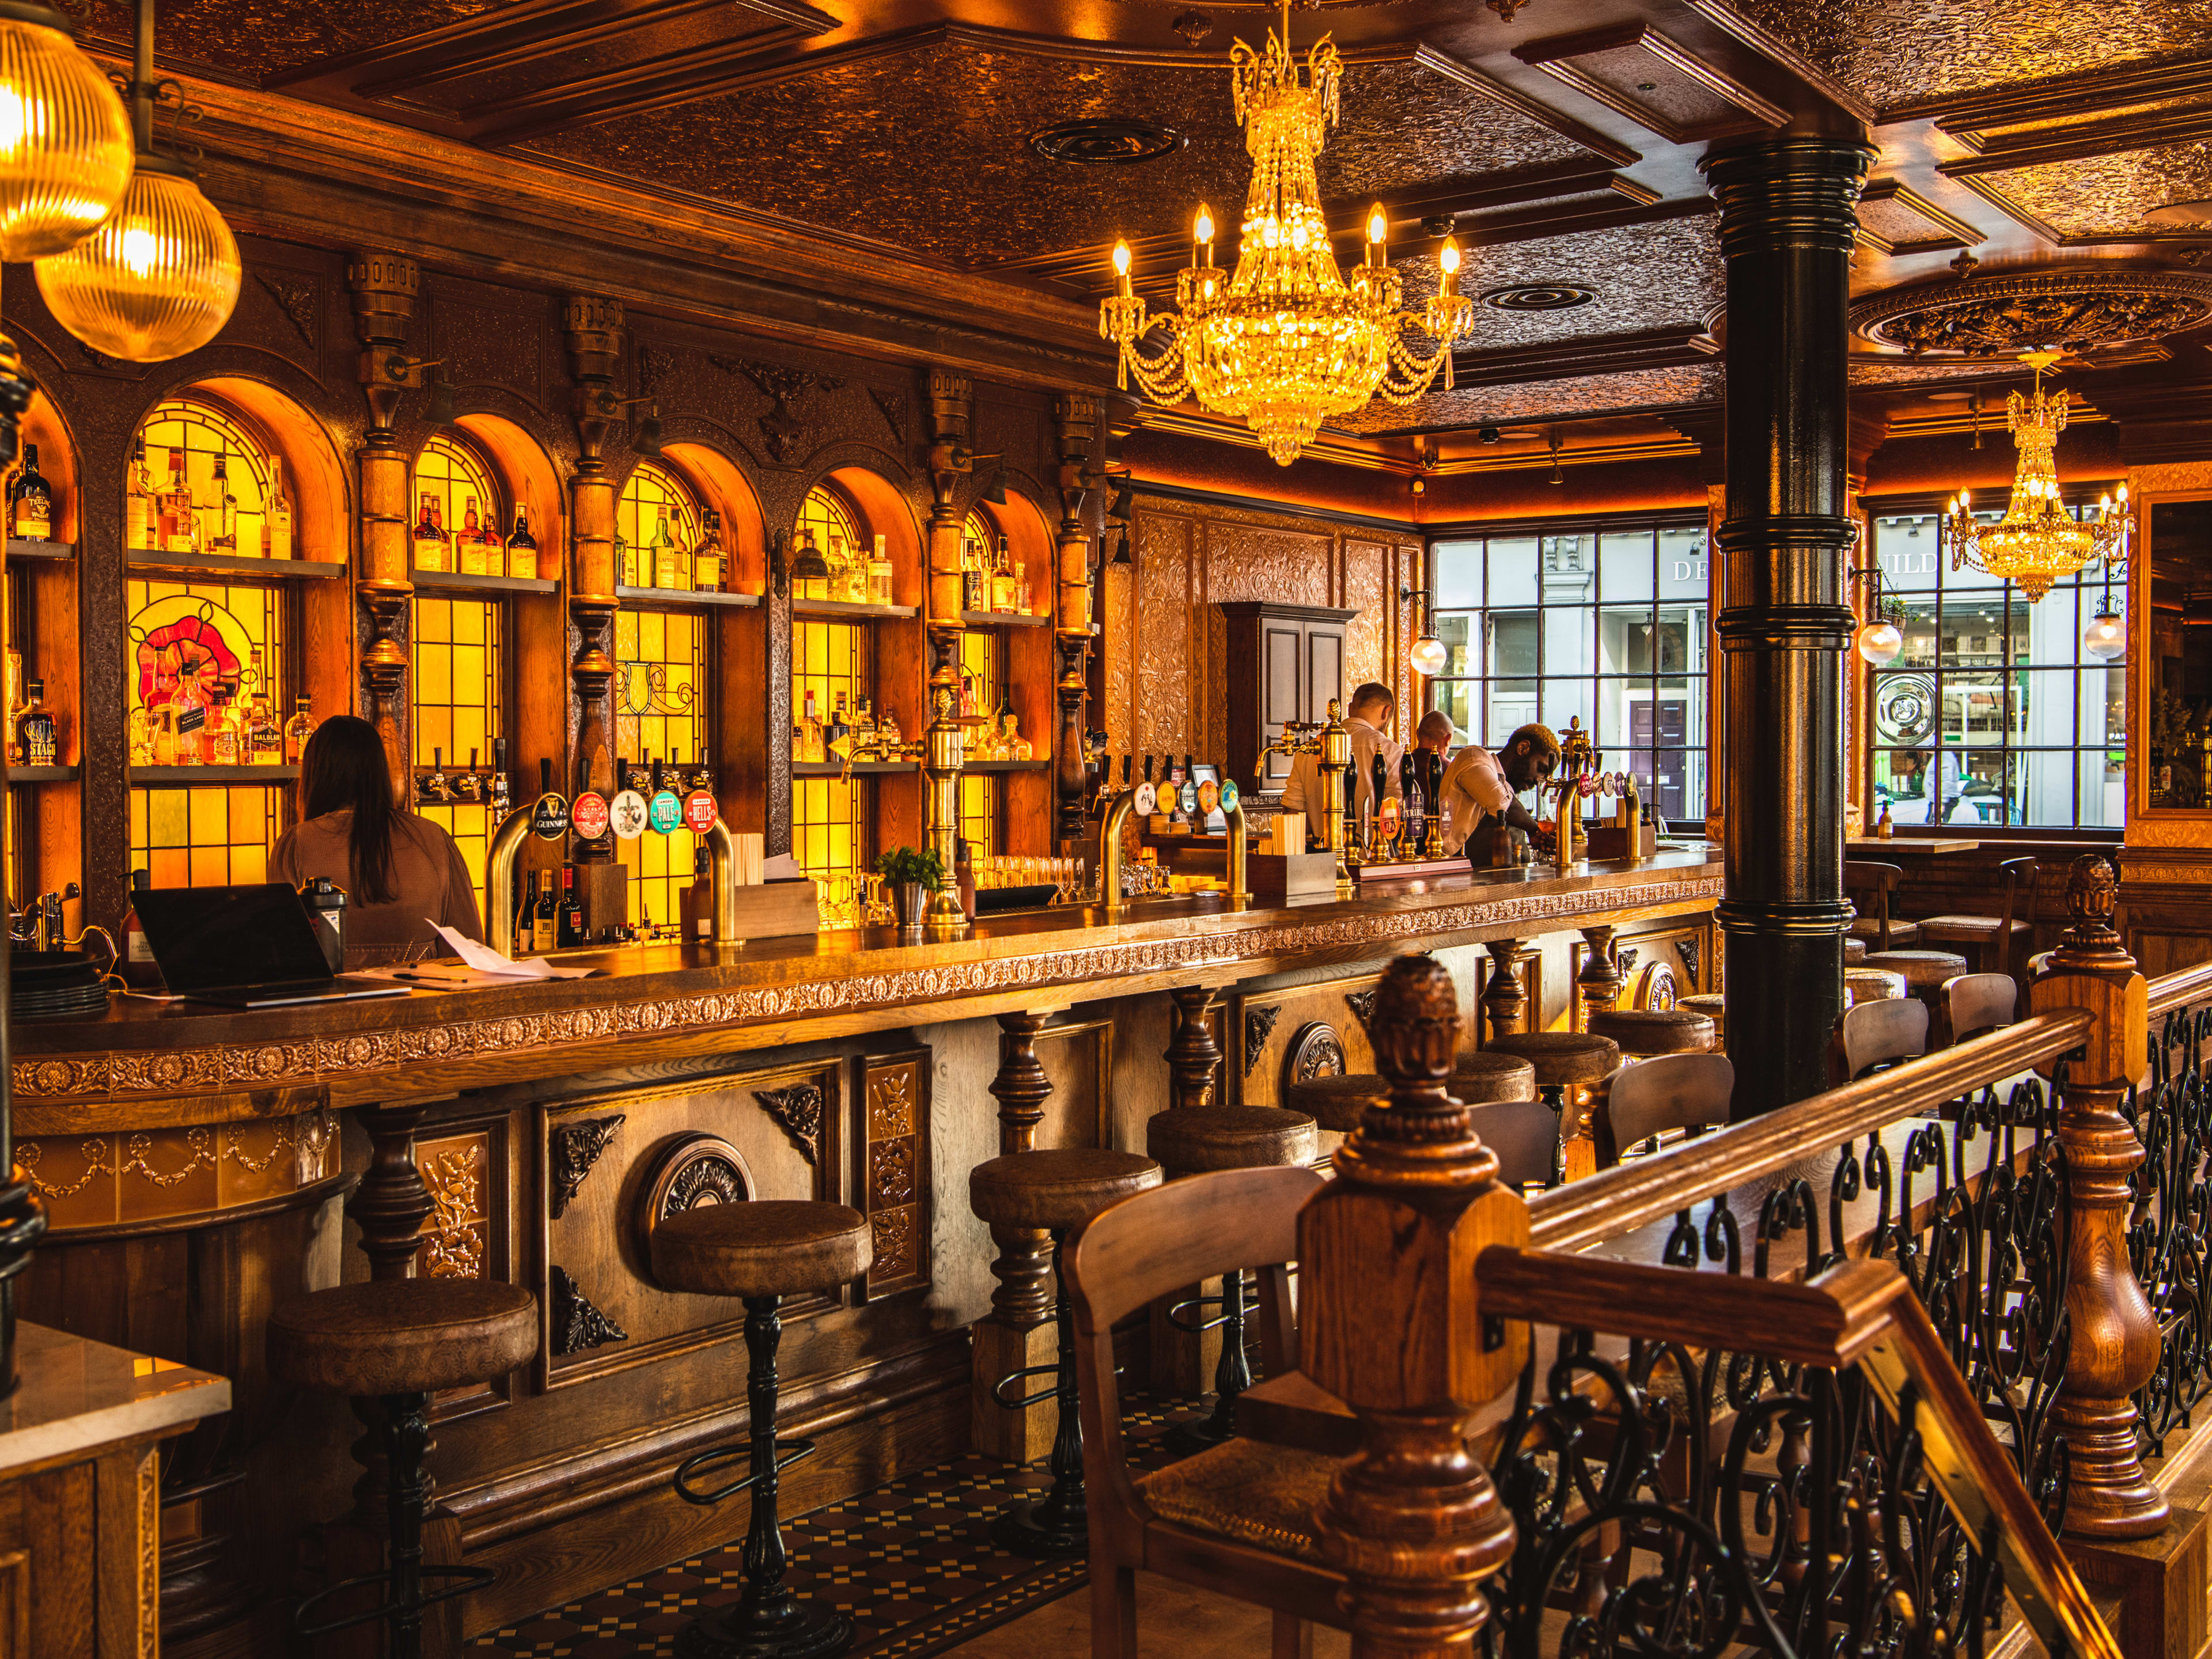 The ornate wooden bar at The Cadogan Arms. There a stained glass windows and chandeliers.